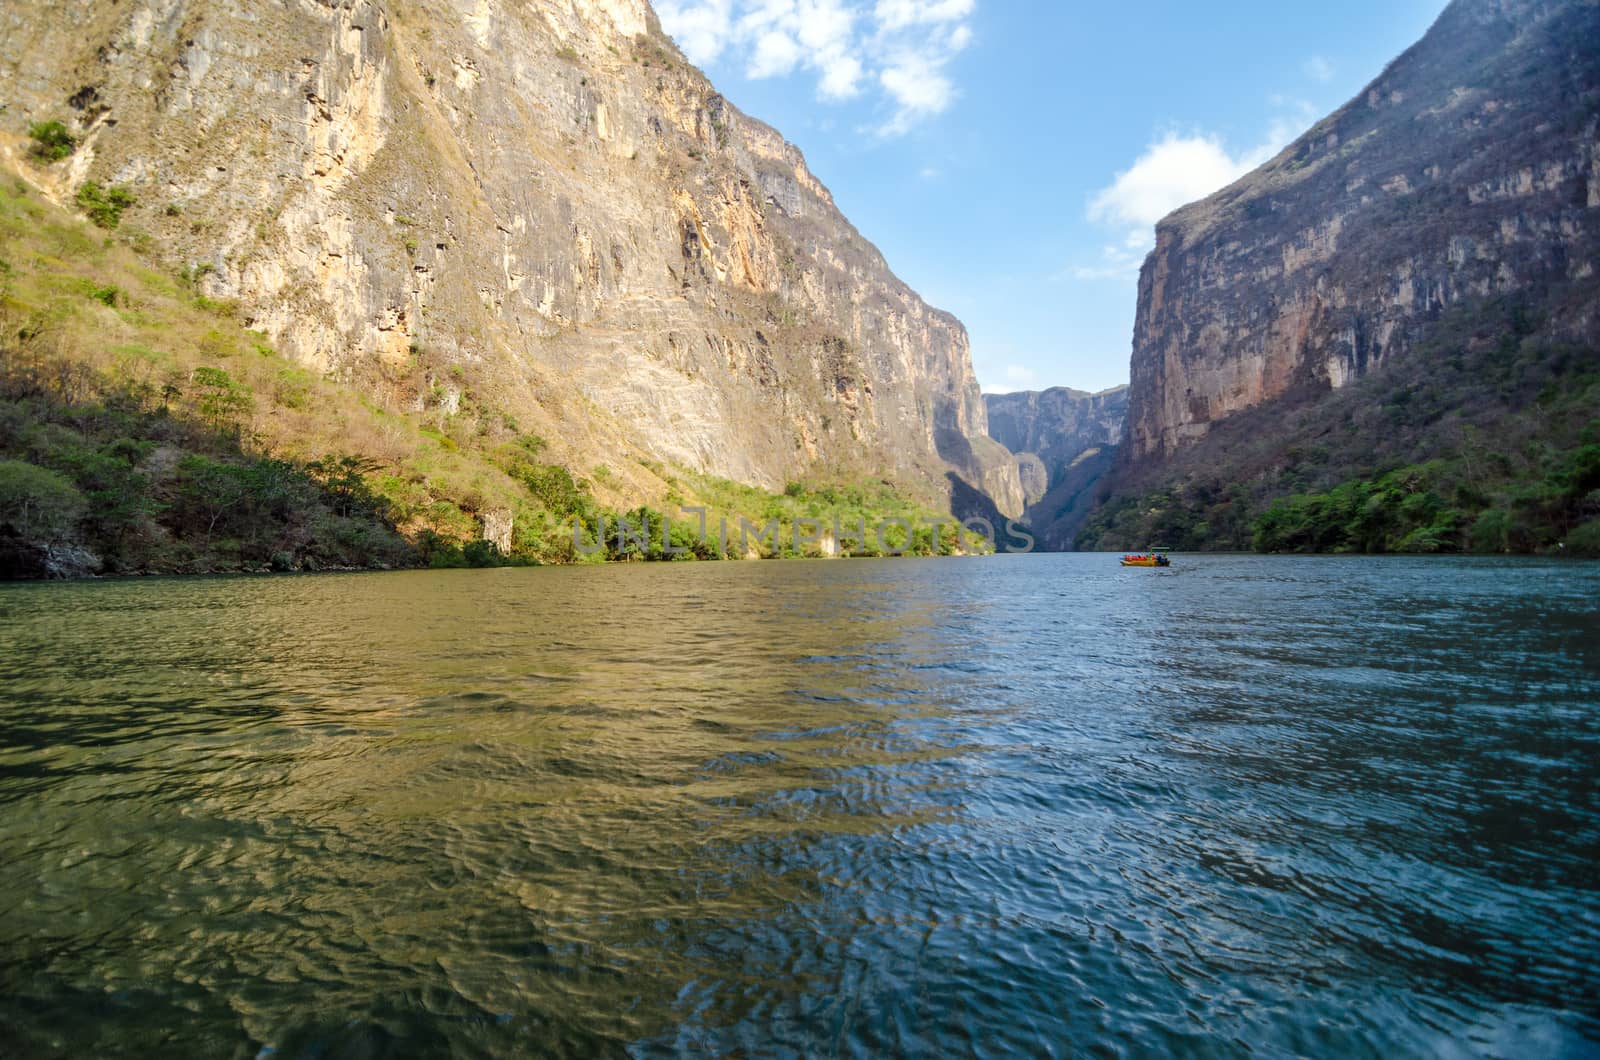 River at the bottom of Sumidero Canyon with a boat in the distance in Chiapas, Mexico